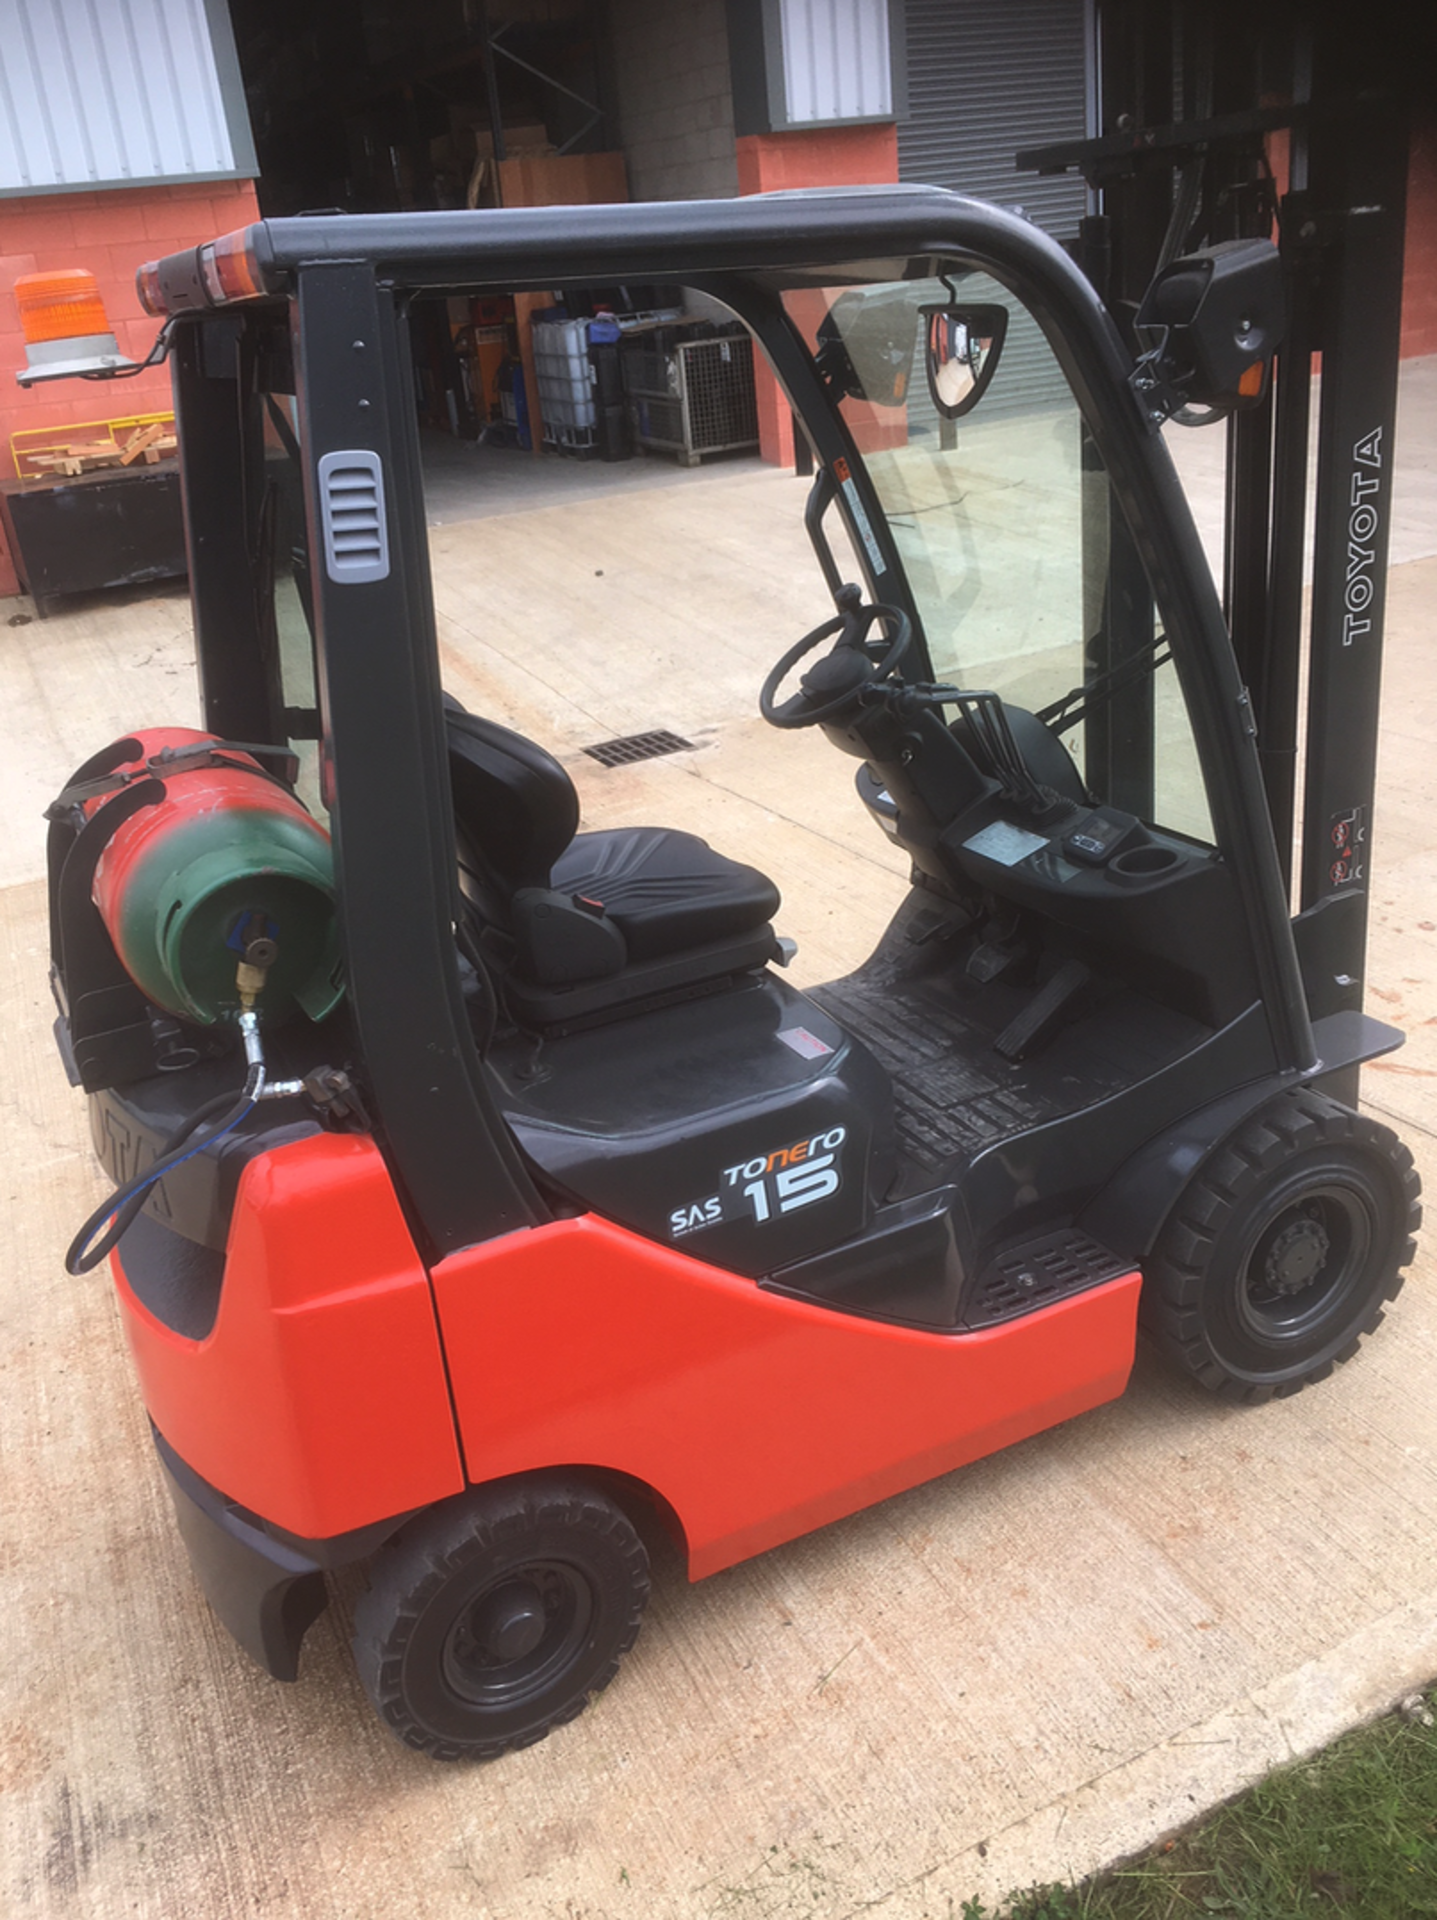 Toyota SAS Series 8 Gas Fork Lift Truck - Fully Refurbished. - Image 2 of 8